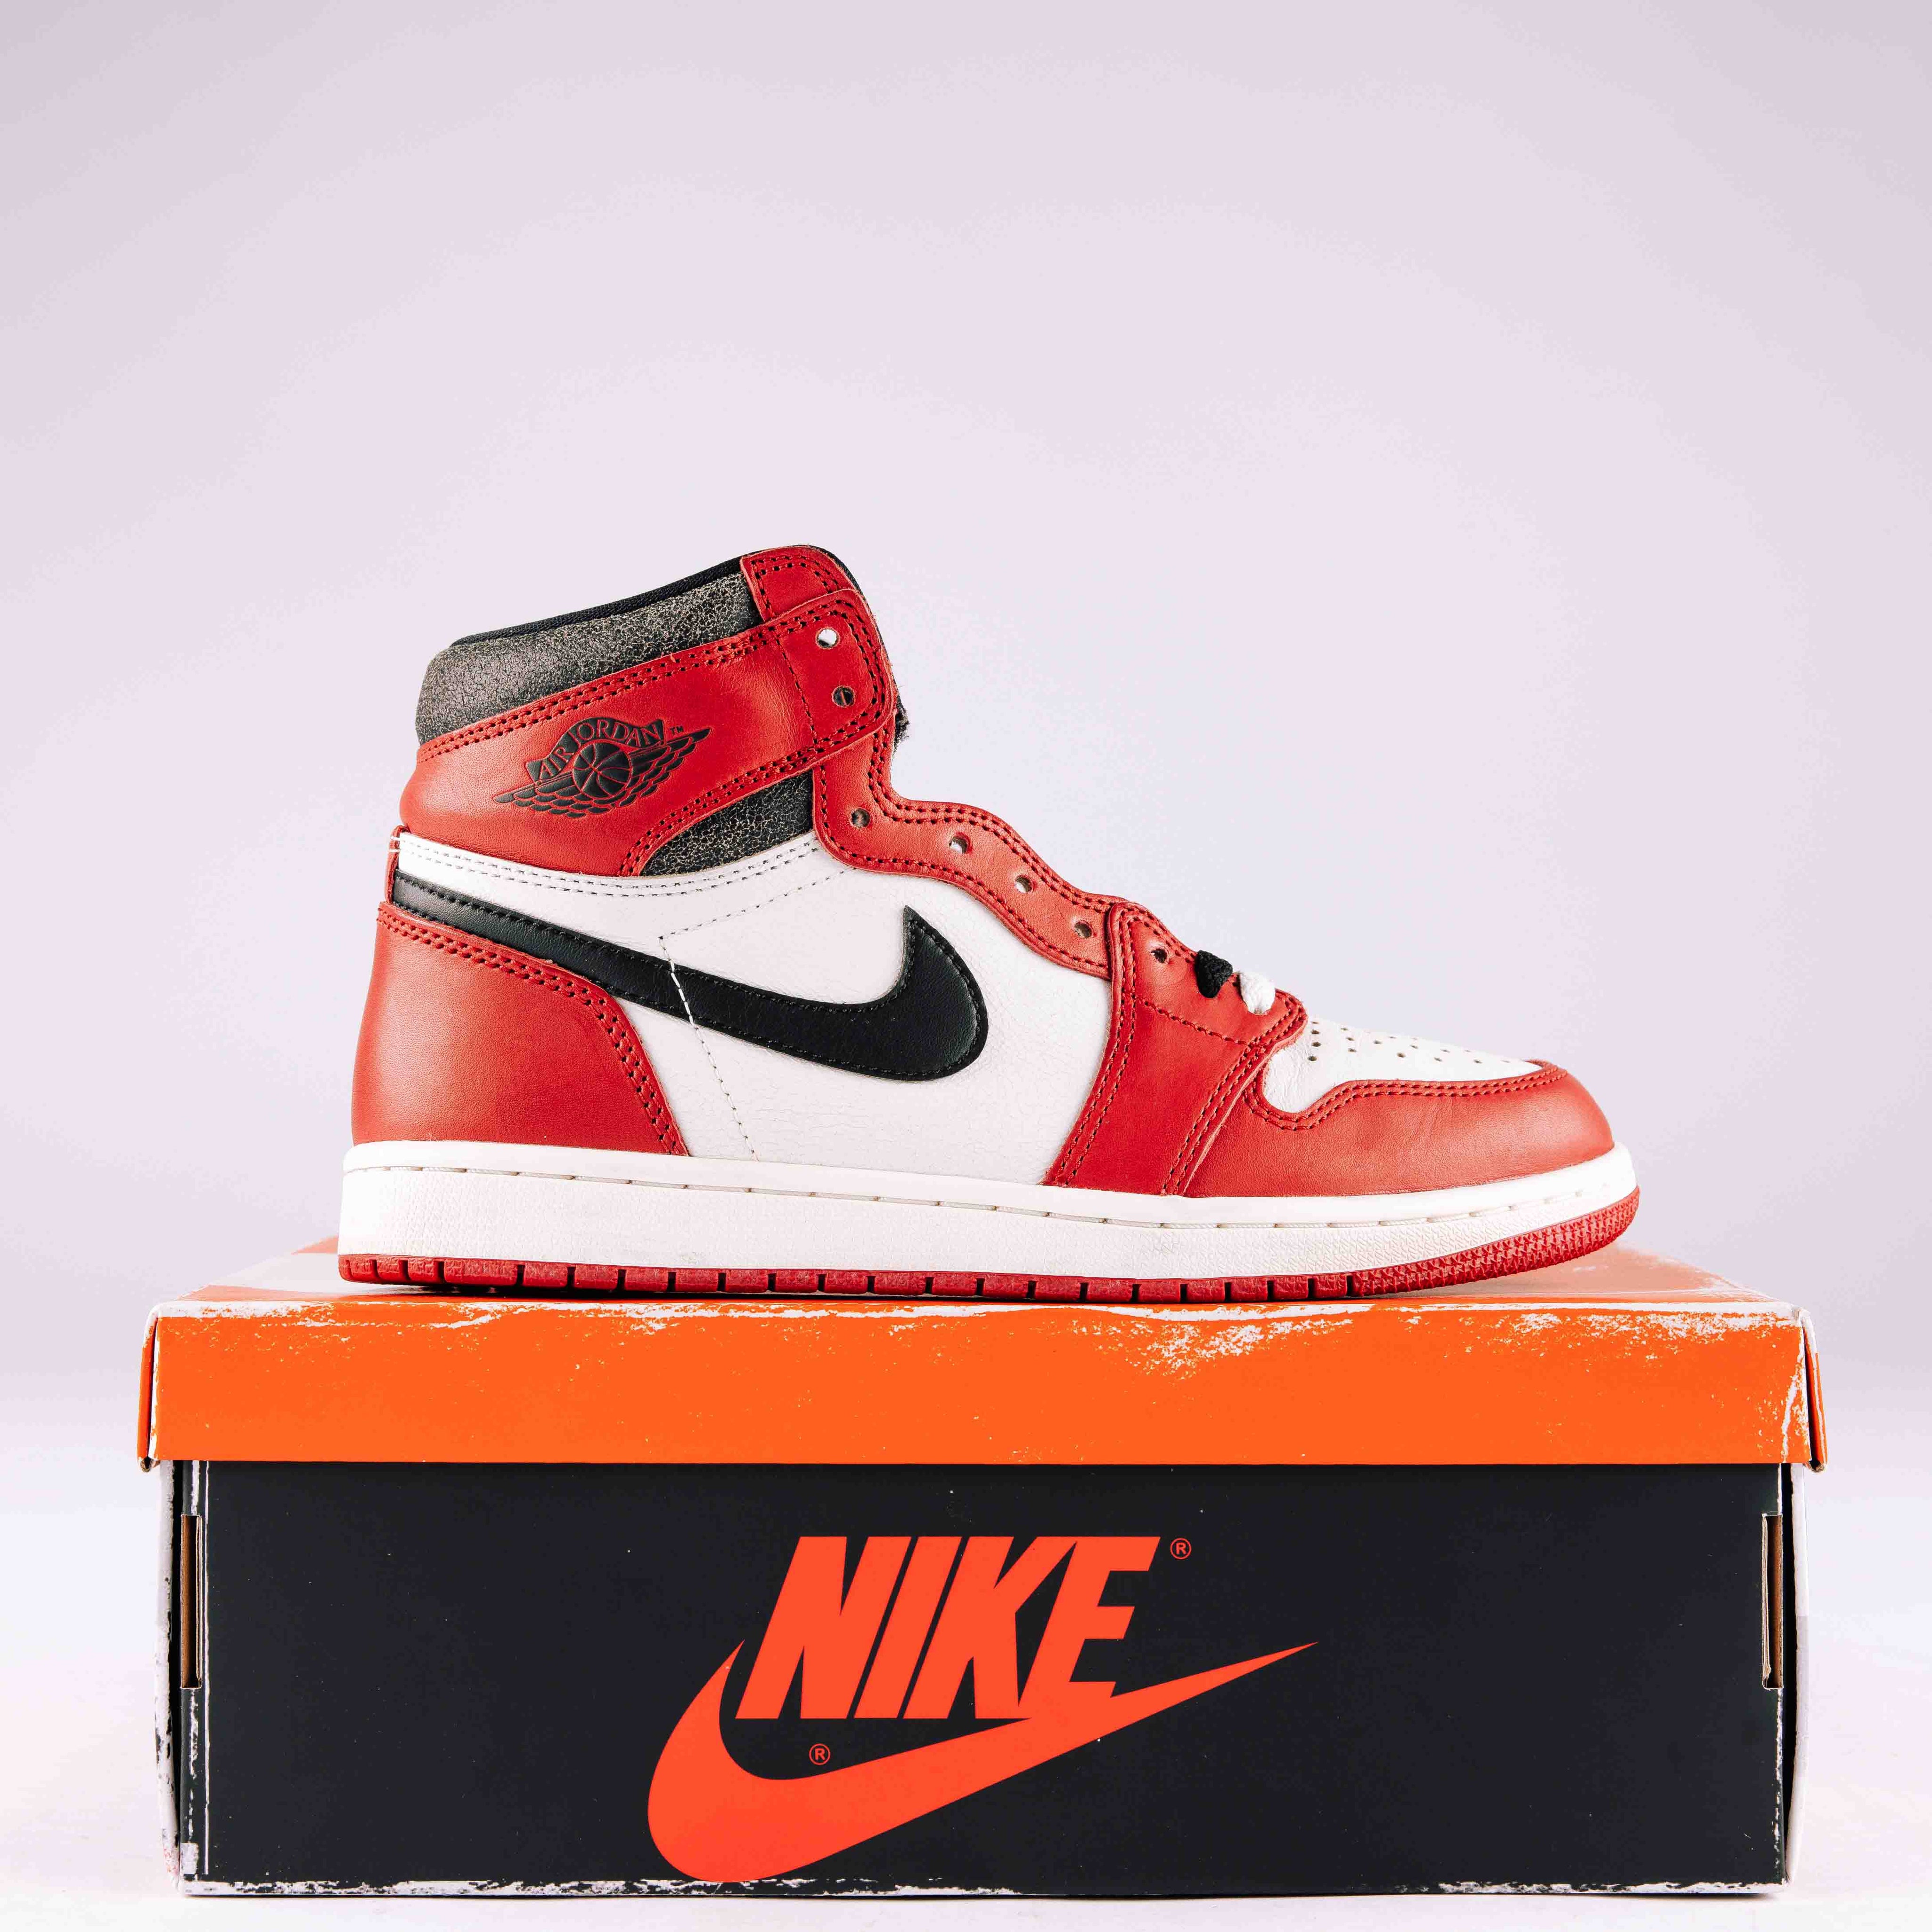 Jordan 1 Retro High OG Chicago Lost and Found (Used))